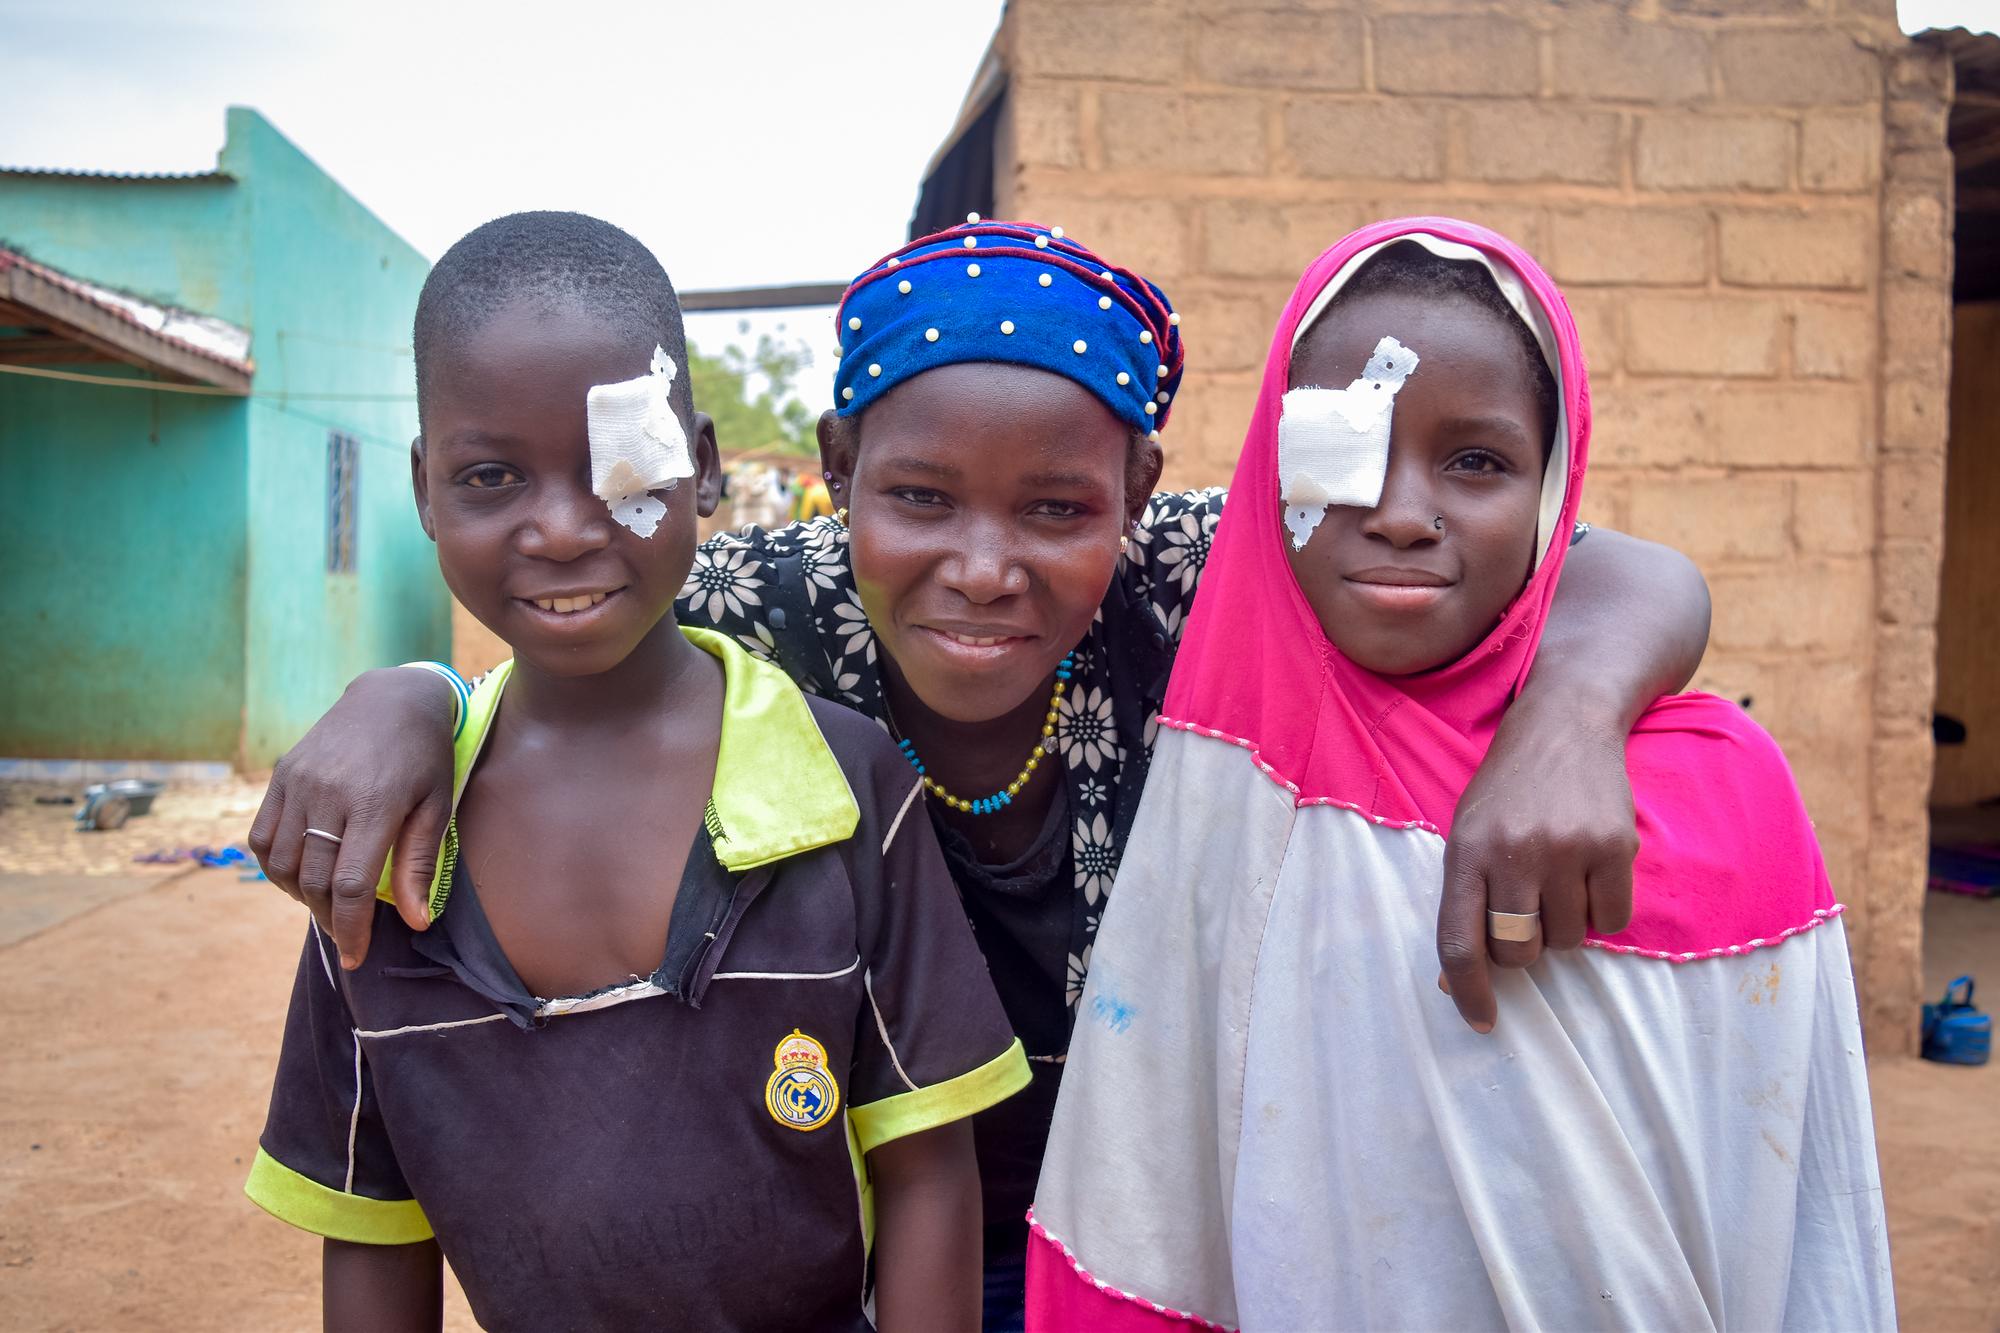 Oumou stands between her two children, Aboubacar, left, and Neimata, right, after their cataract surgeries